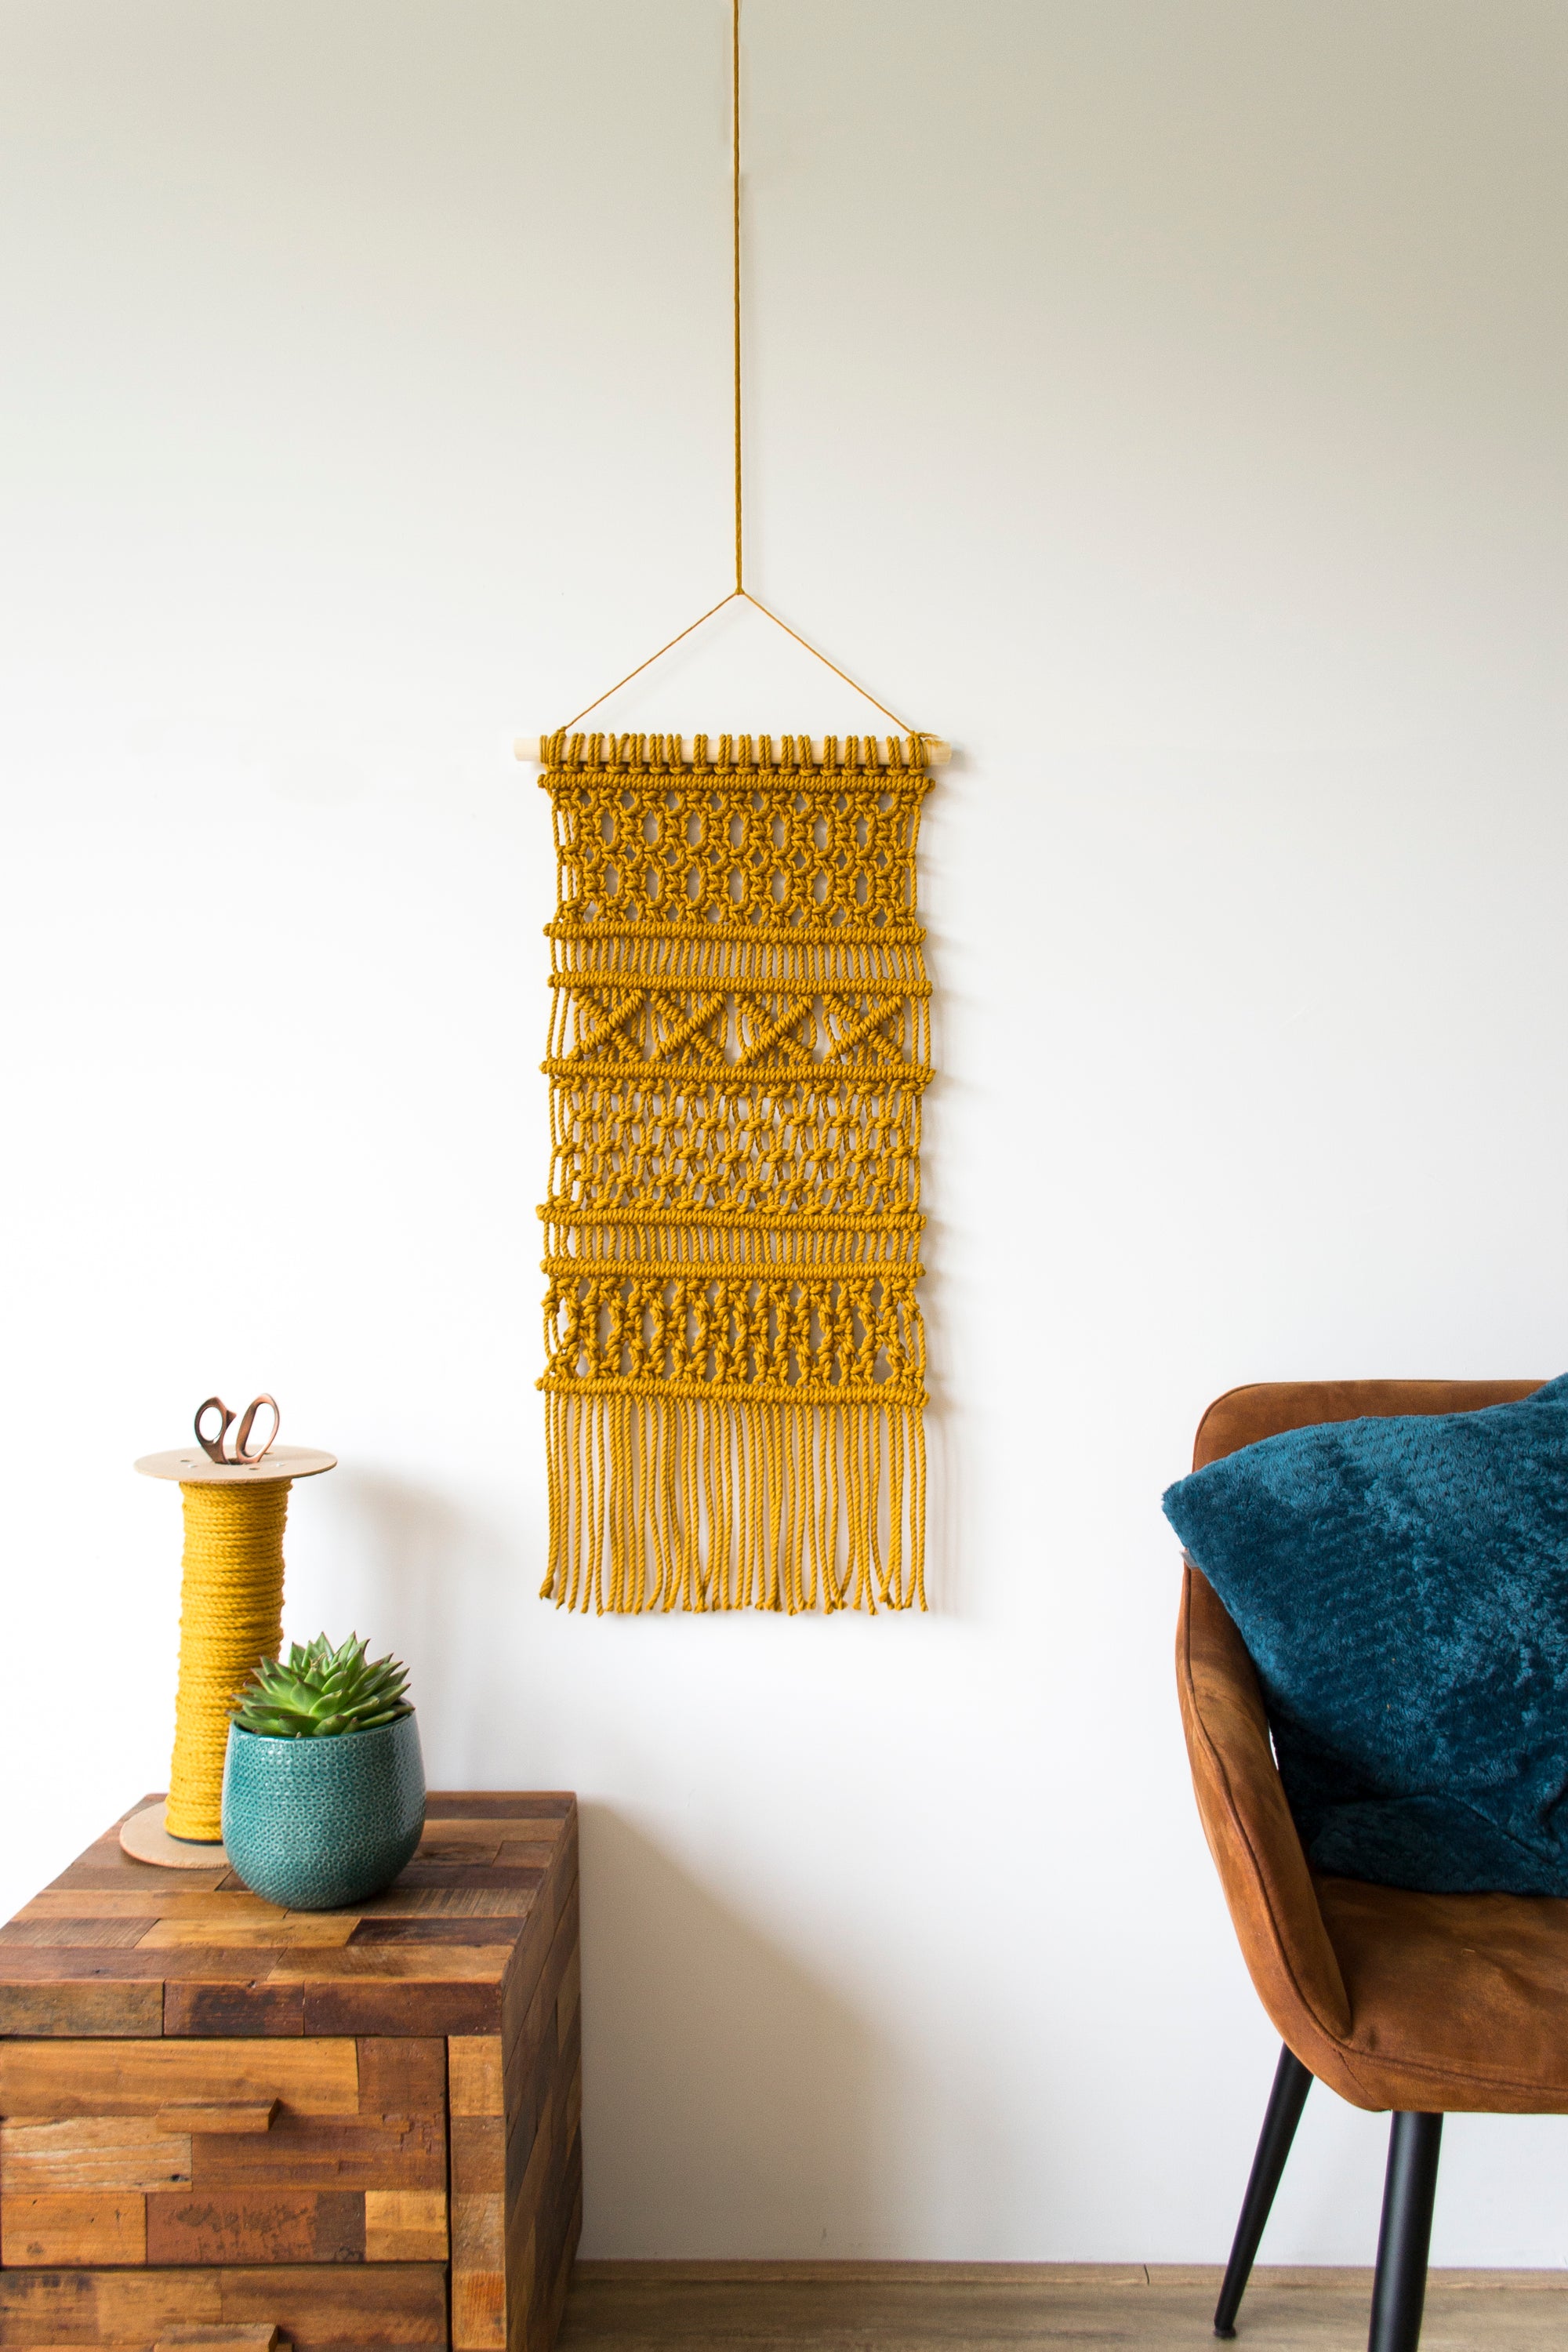 Macrame Wall Hanging 'IVY' - DIY KIT - Available in multiple color variations